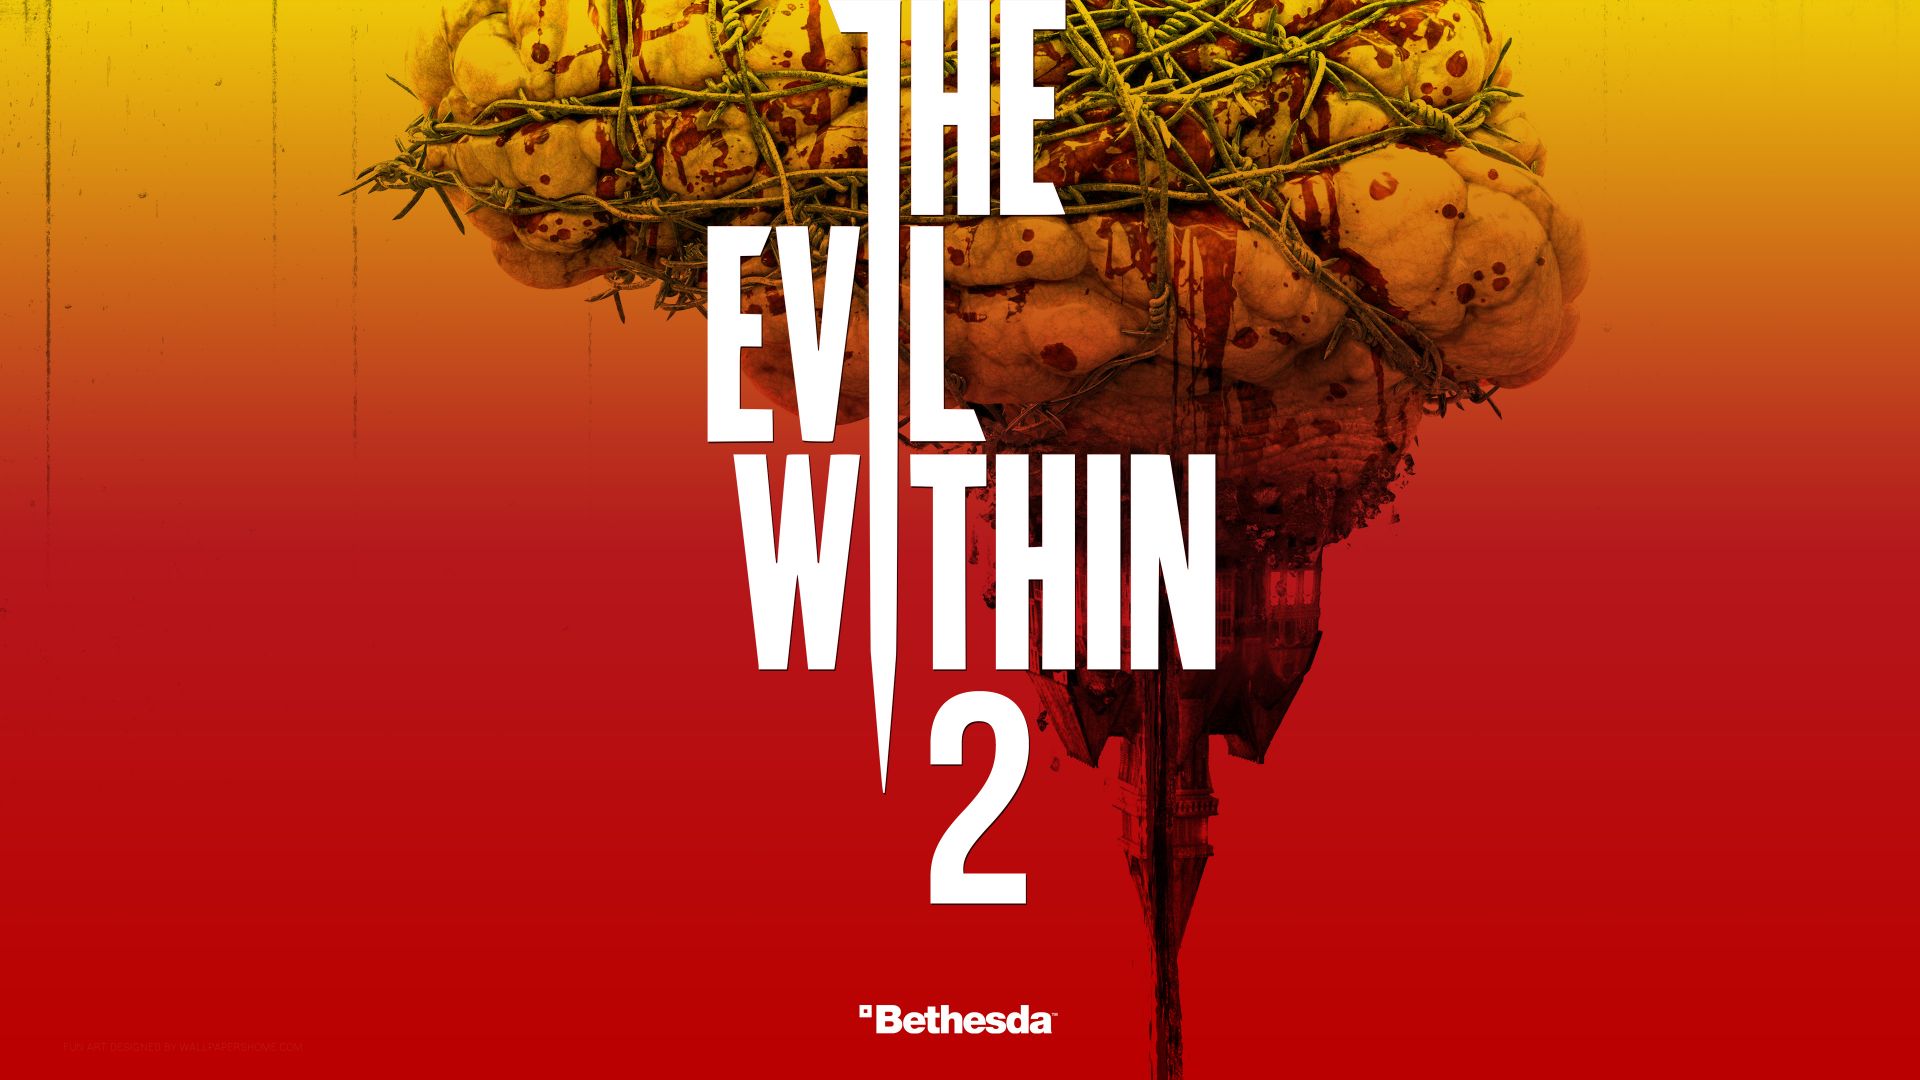 Wallpaper The evil within 2, video game, poster